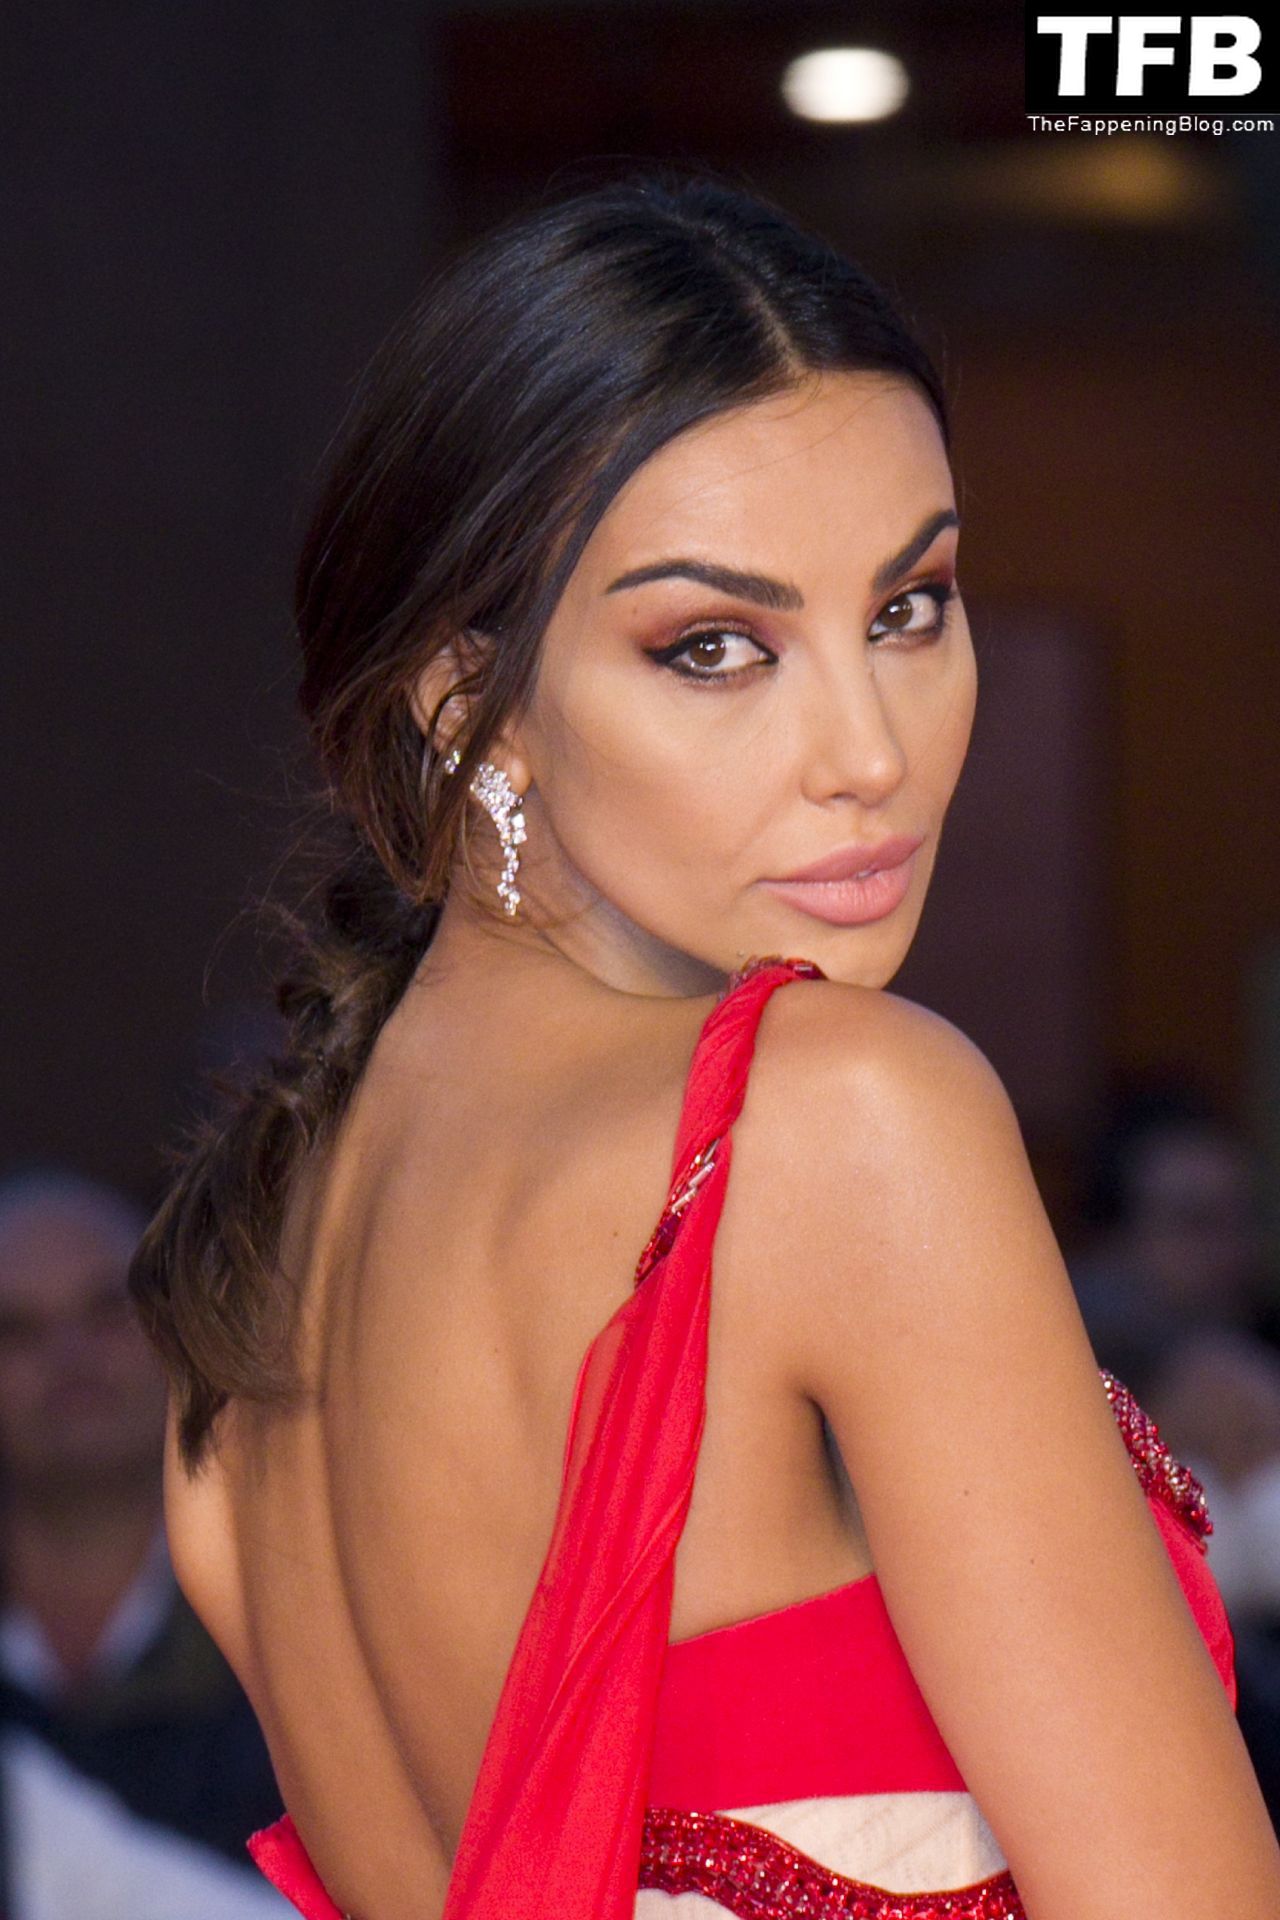 Madalina Diana Ghenea Poses on the Red Carpet at the Rome Cinema Fest (43 New Photos)